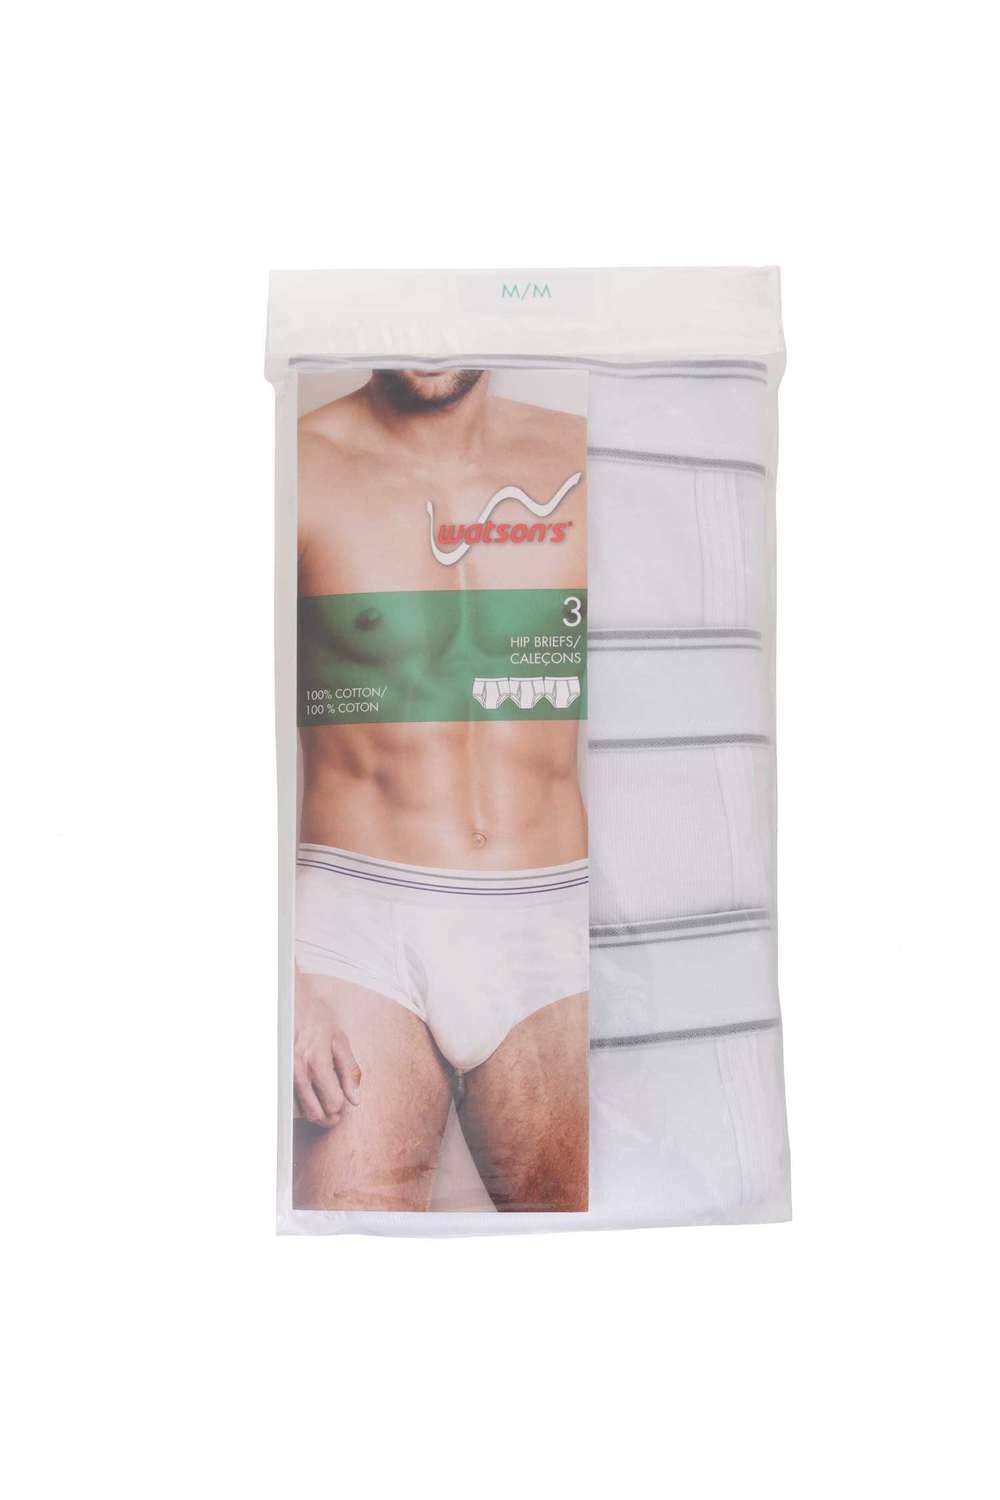 https://www.rossy.ca/media/A2W/products/watsons-mens-100-cotton-underwear-3-pack-hip-briefs-white-small-s-72908-1.jpg